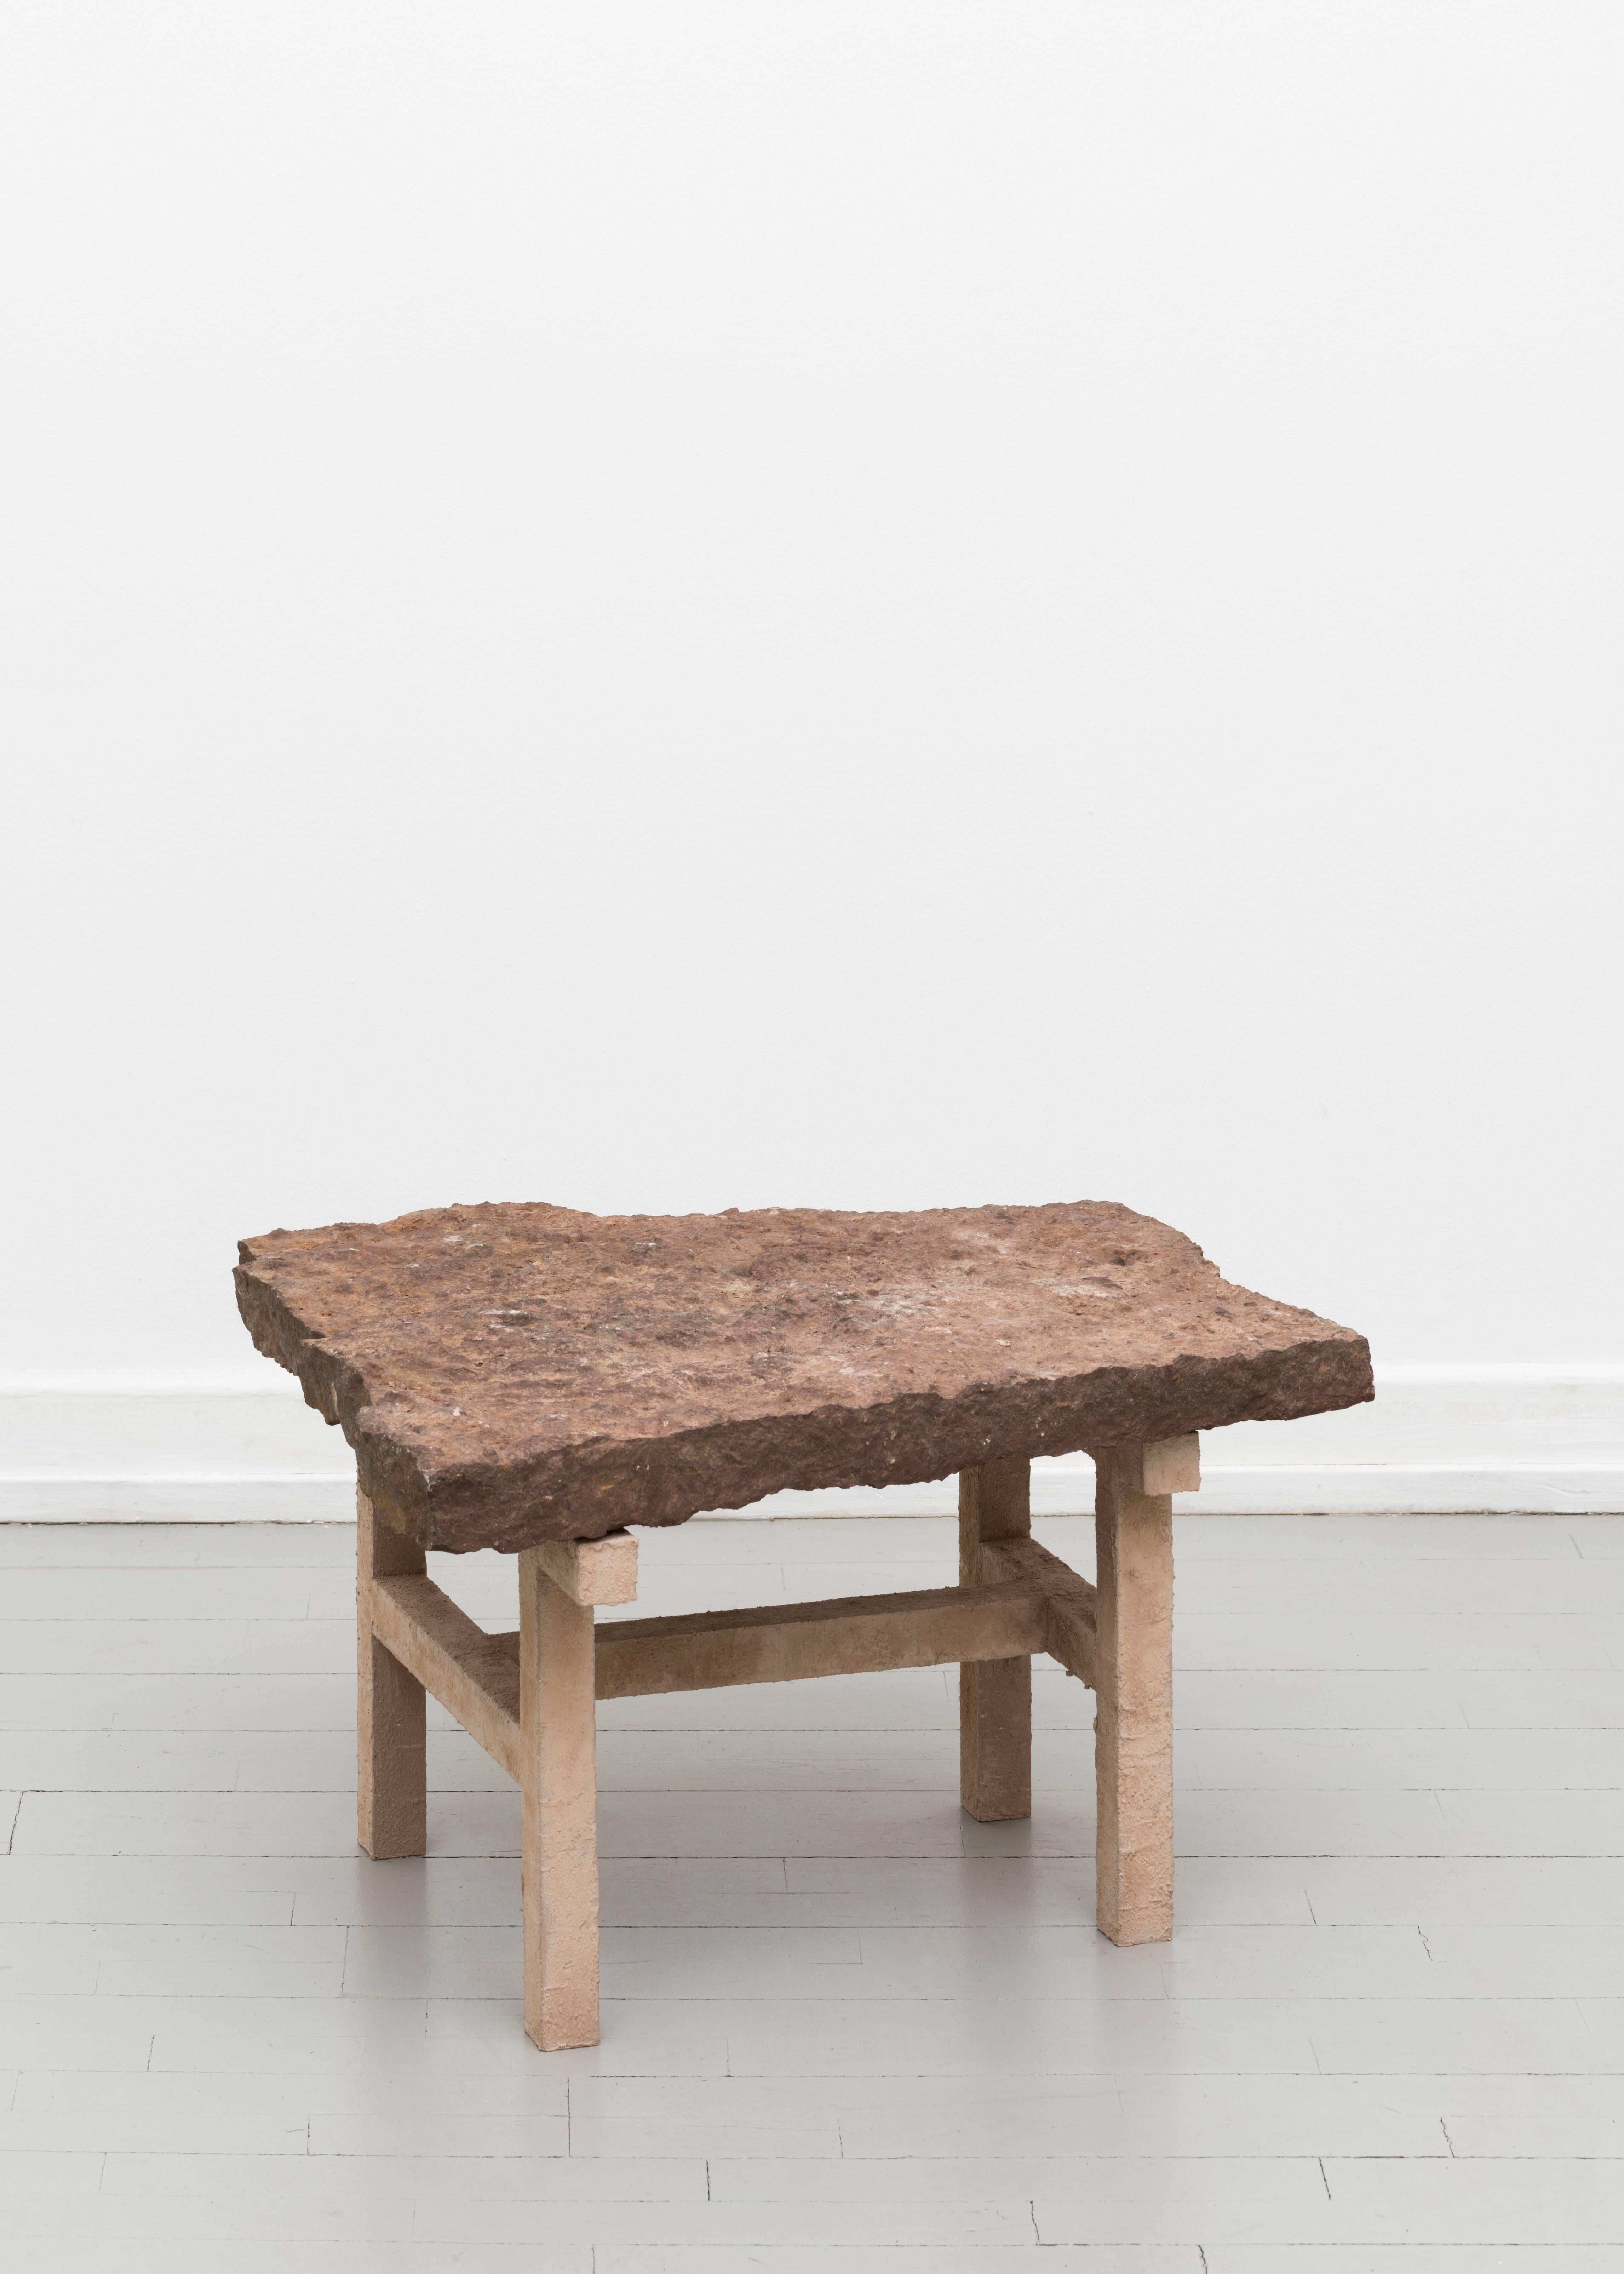 Fredrik Paulsen (b. 1980) lives and works in Stockholm. His work spans from furniture to interior- and exhibition design. 

'Stoned' table was specifically made for the exhibition Stoned at Etage Projects. A stone quarry in Öland, Sweden, is the